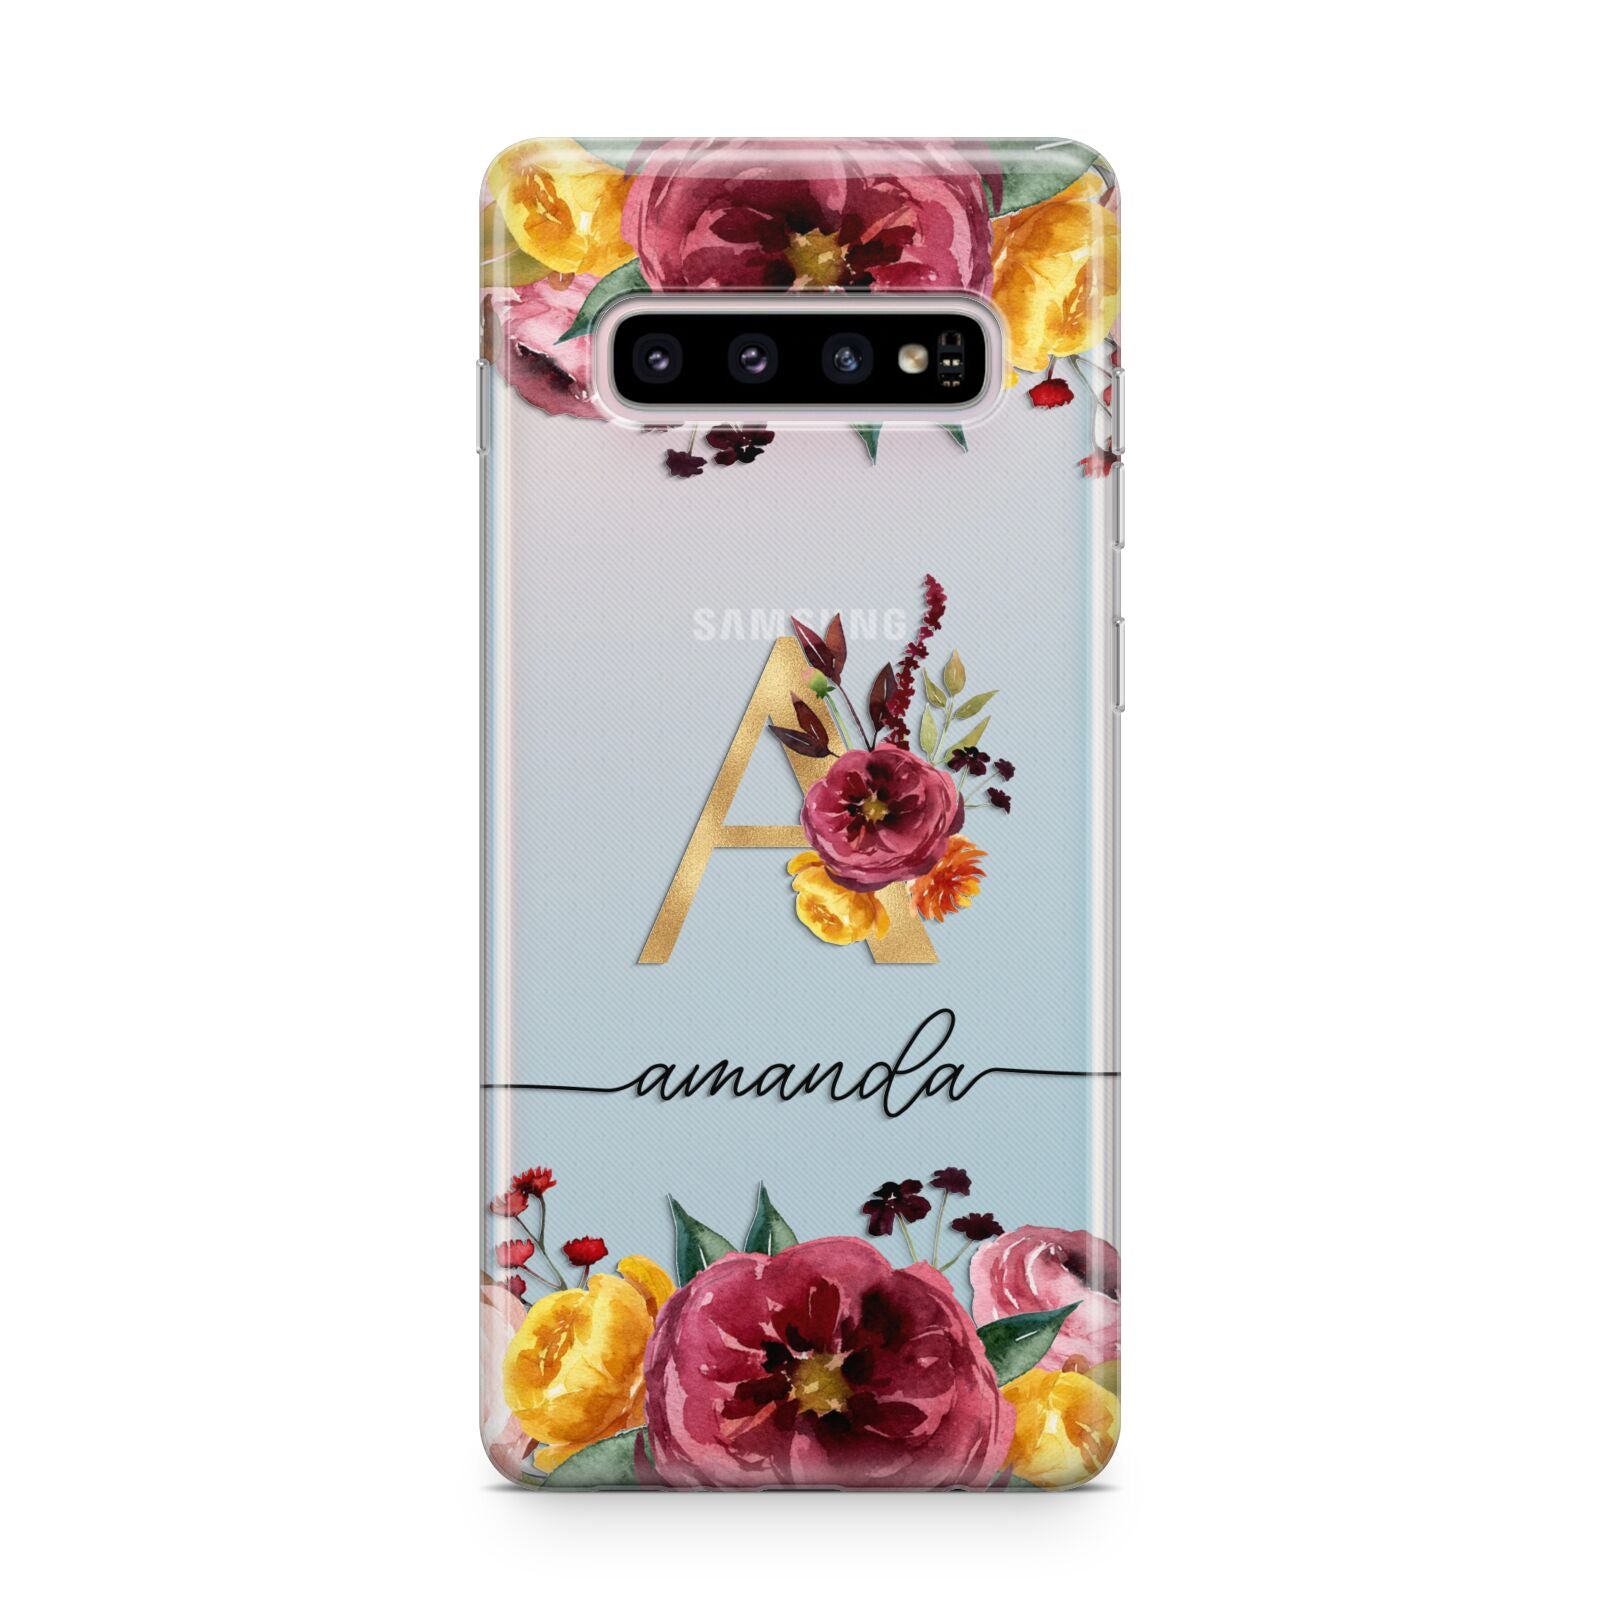 Autumn Watercolour Flowers with Initial Samsung Galaxy S10 Plus Case